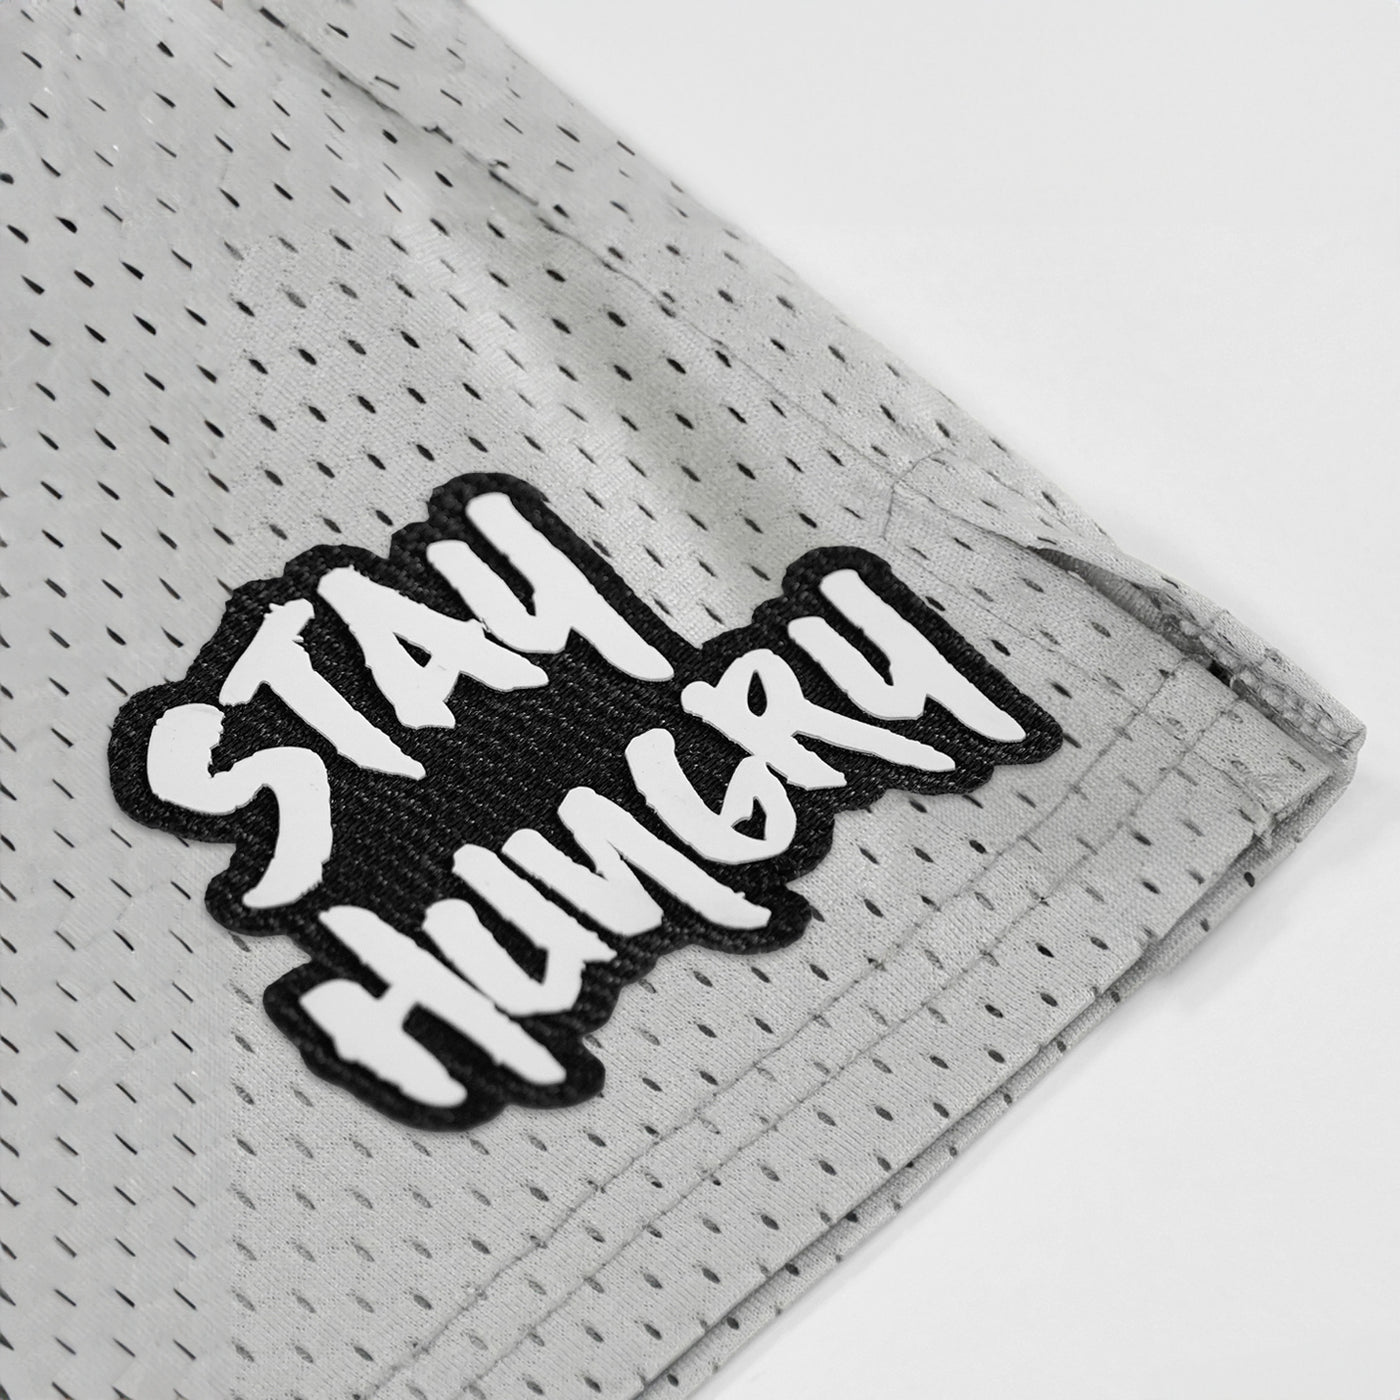 Stay Hungry Patch Shorts - 7"